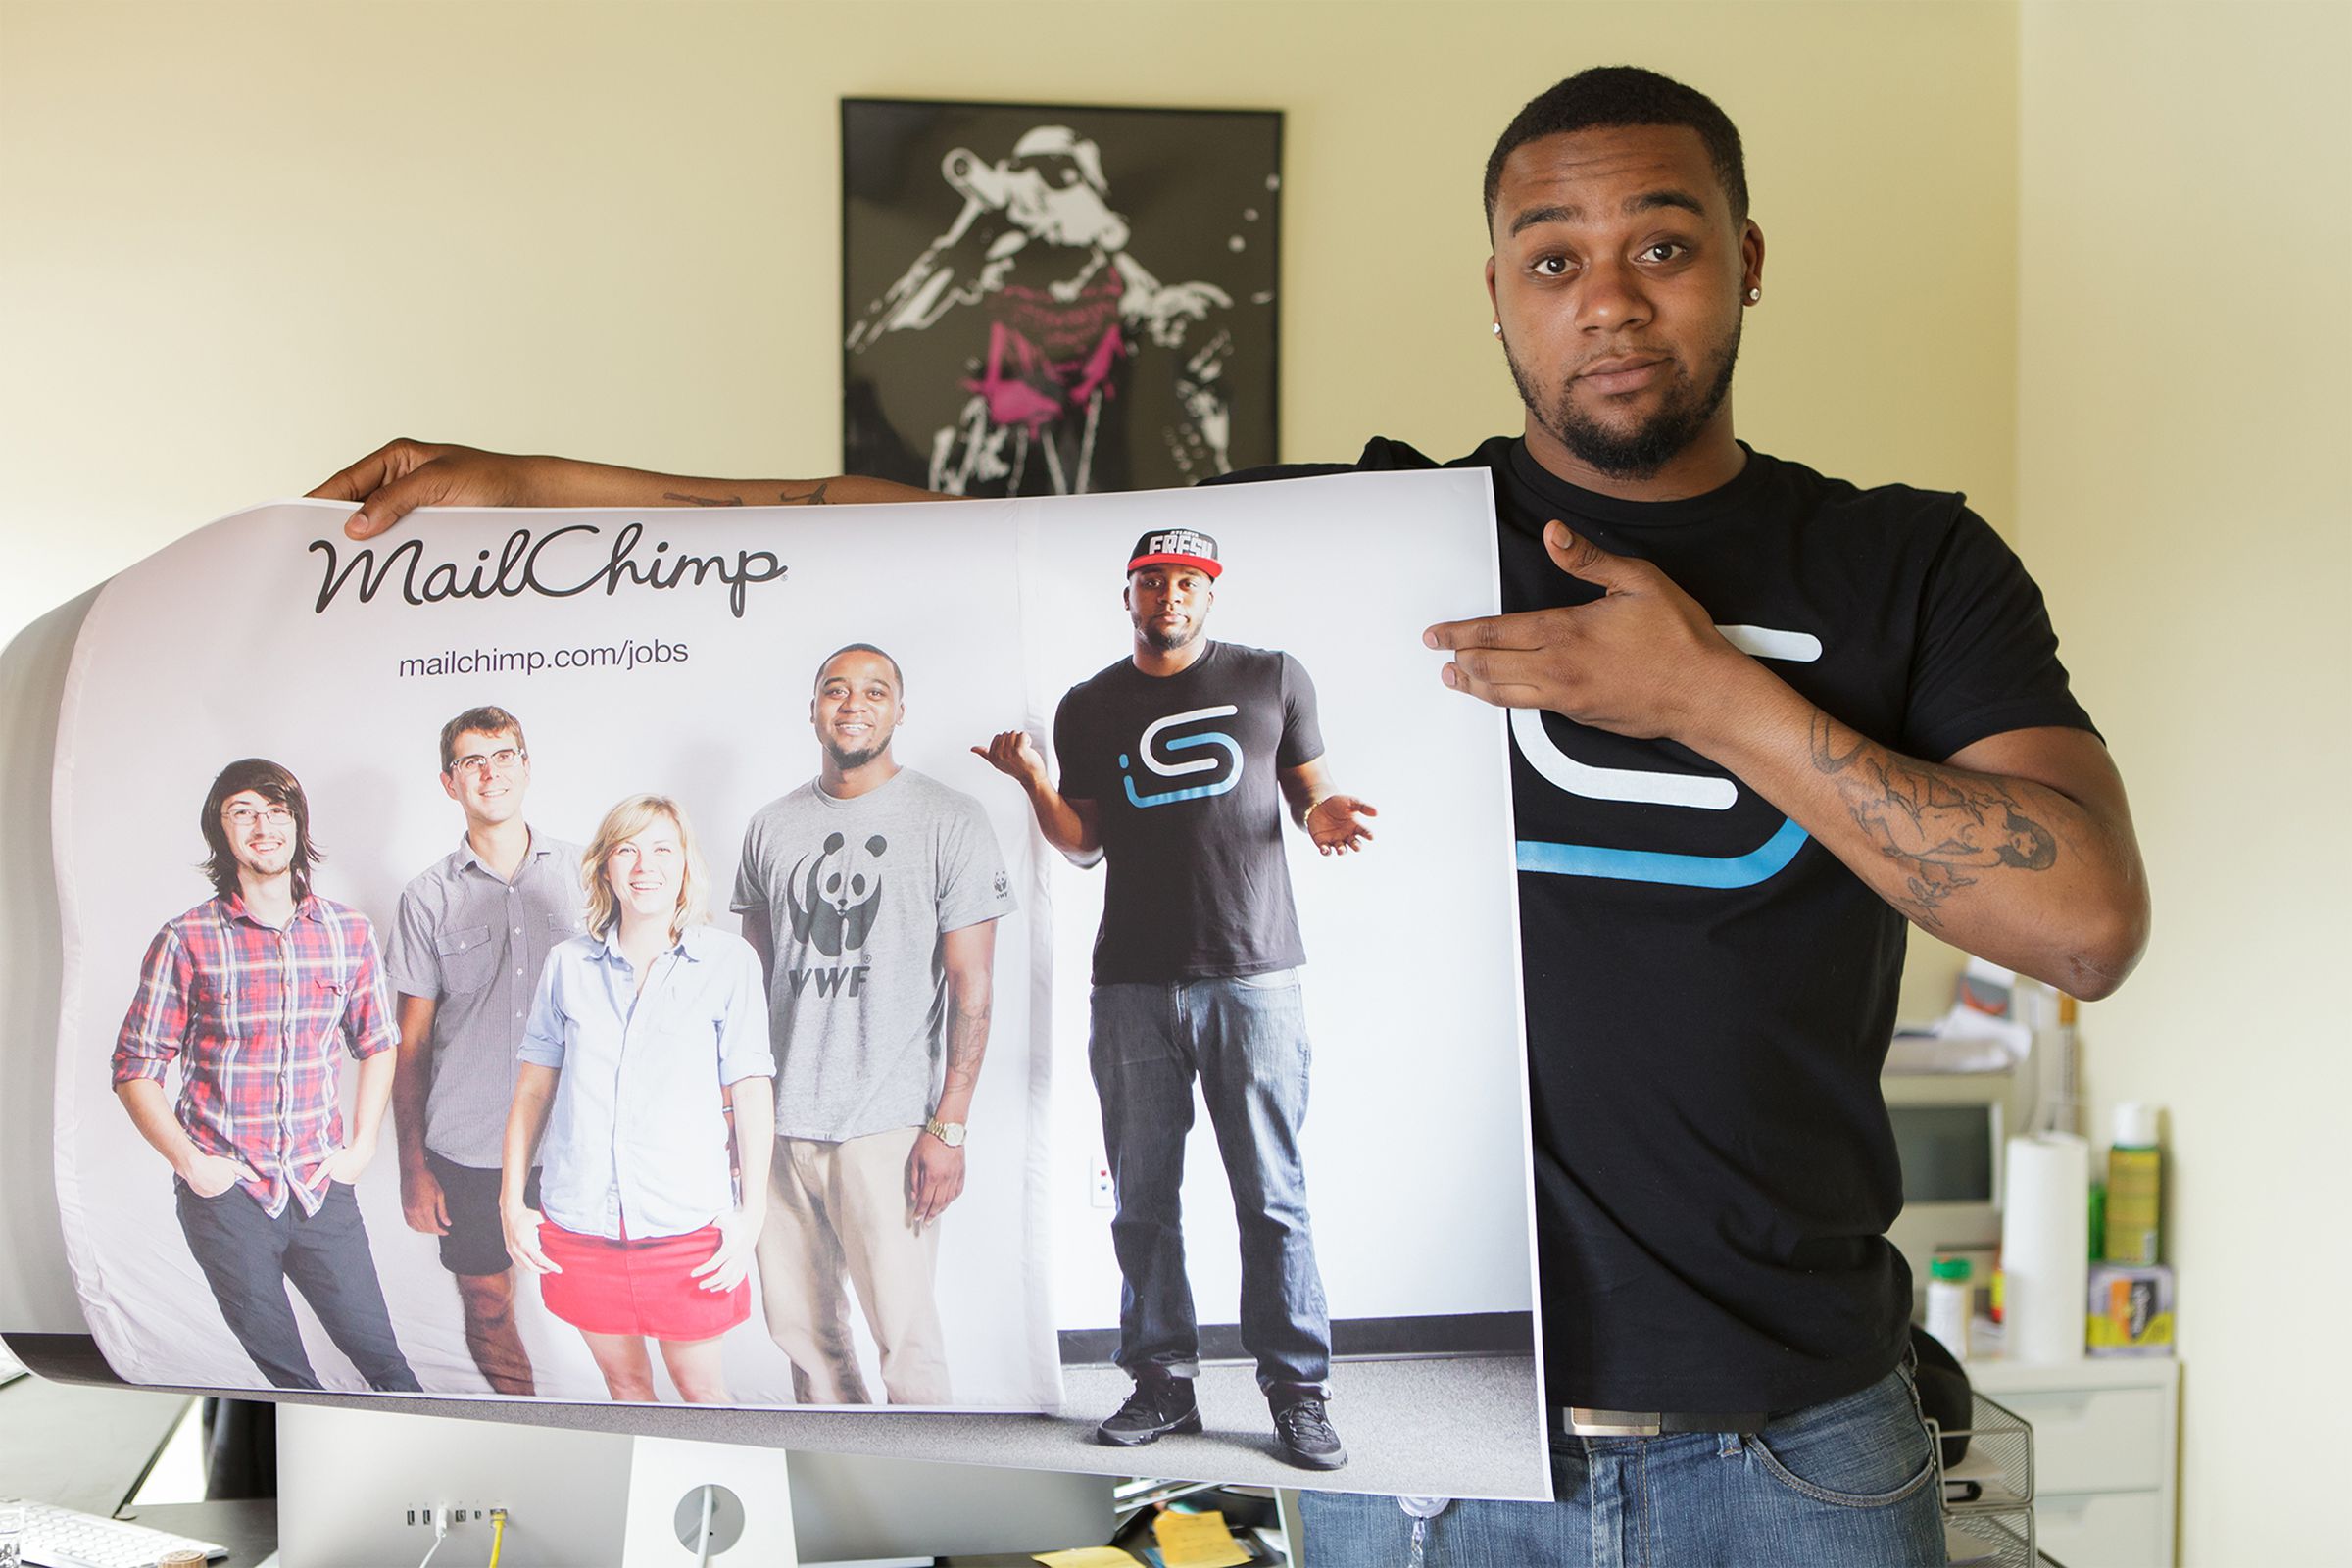 Angelo Ragin on a Mailchimp recruiting poster.